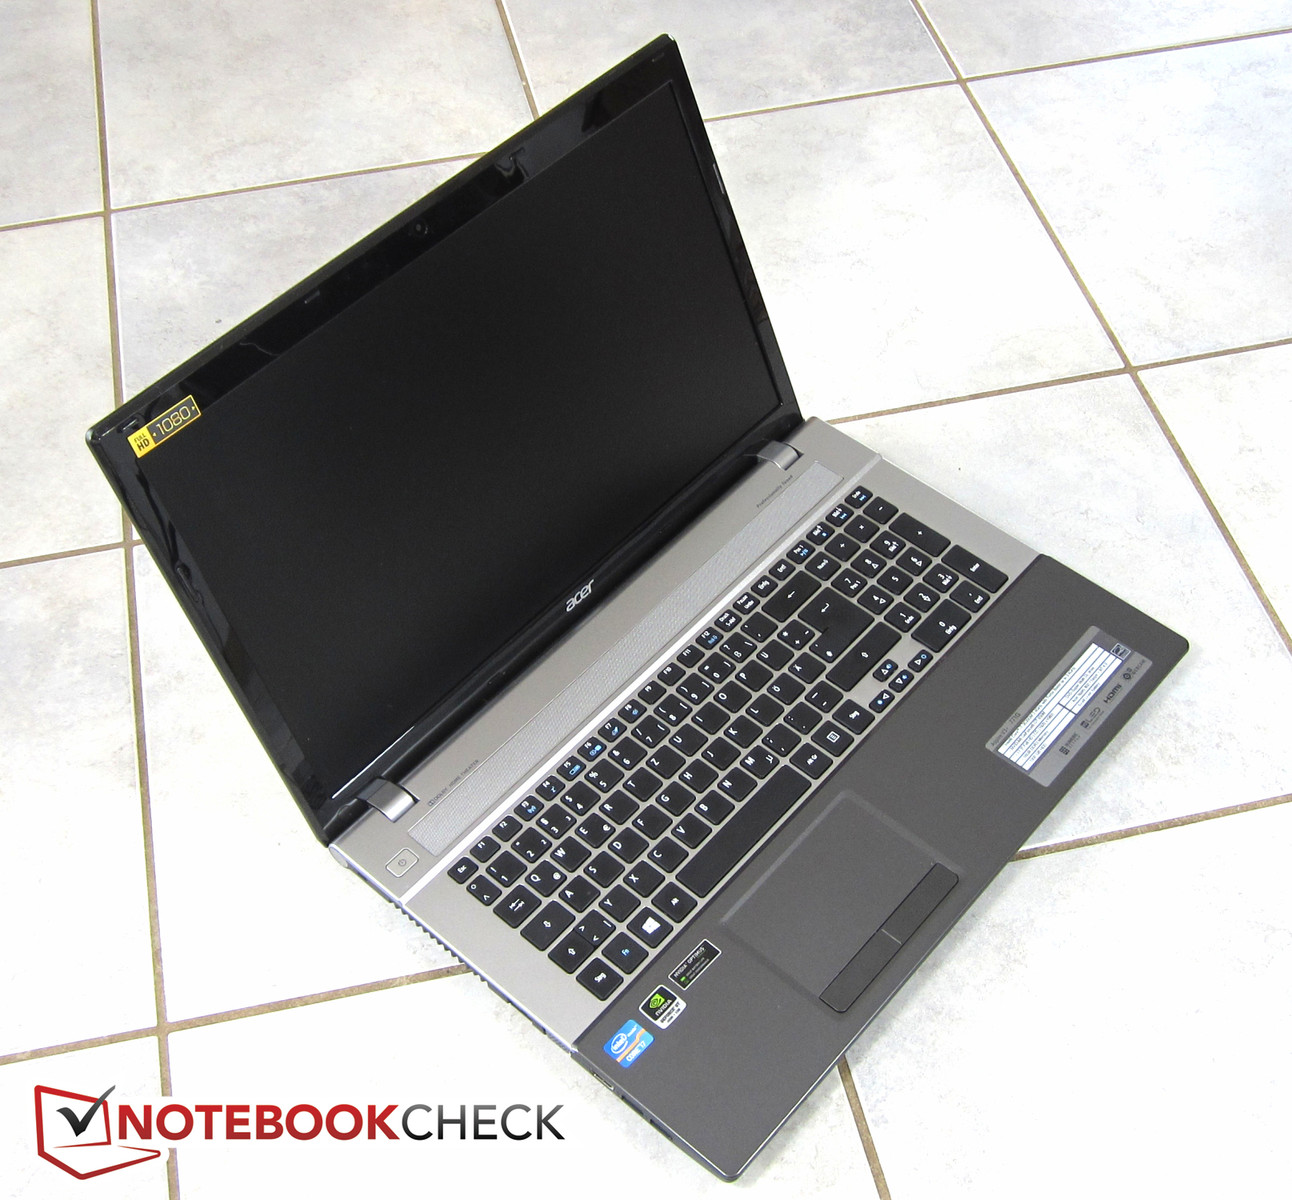 Review Update Acer Aspire V3-771G (FHD) Notebook - NotebookCheck 